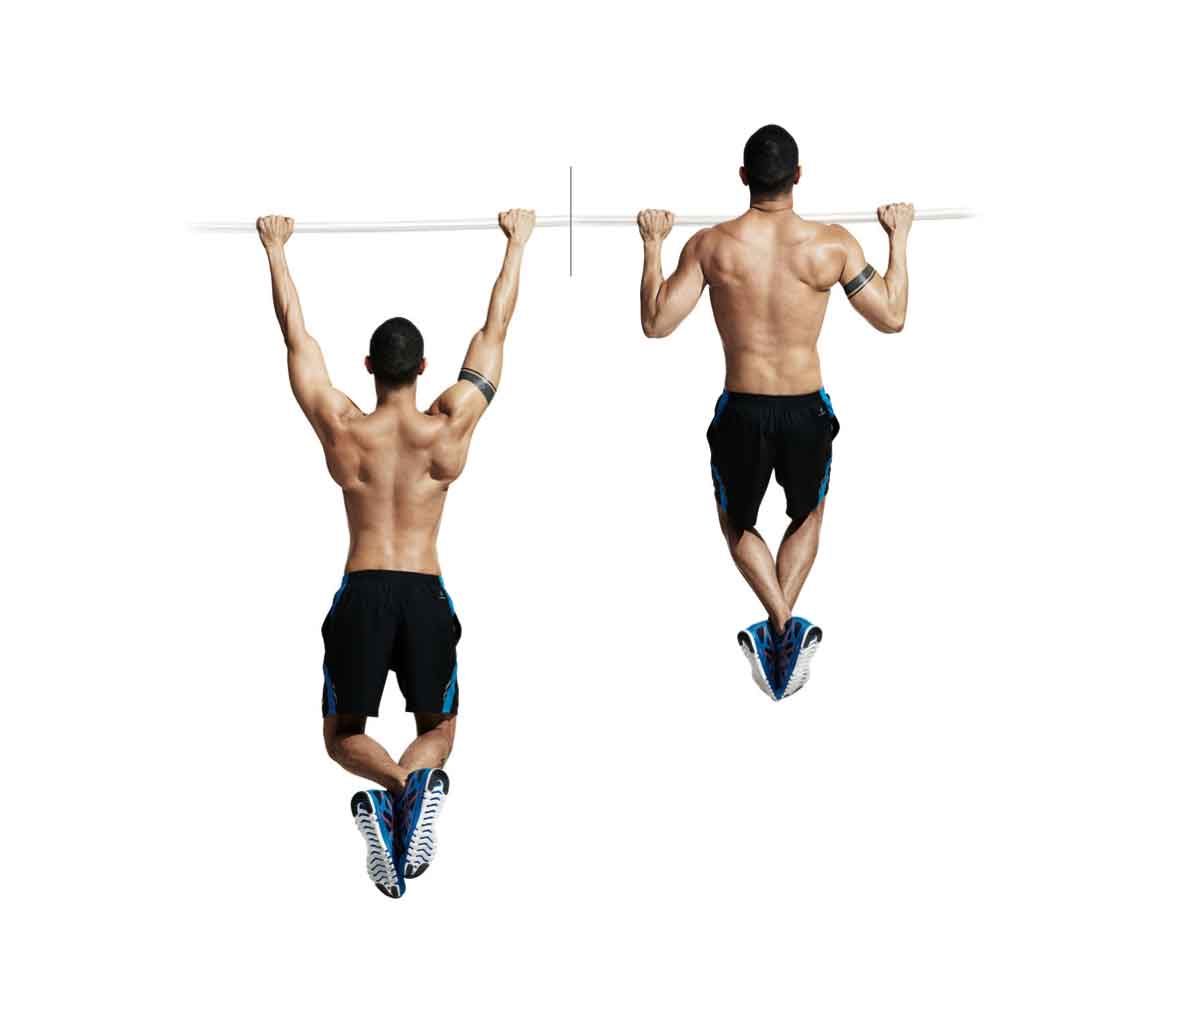 5 Reasons Why You Should Do Pull-ups